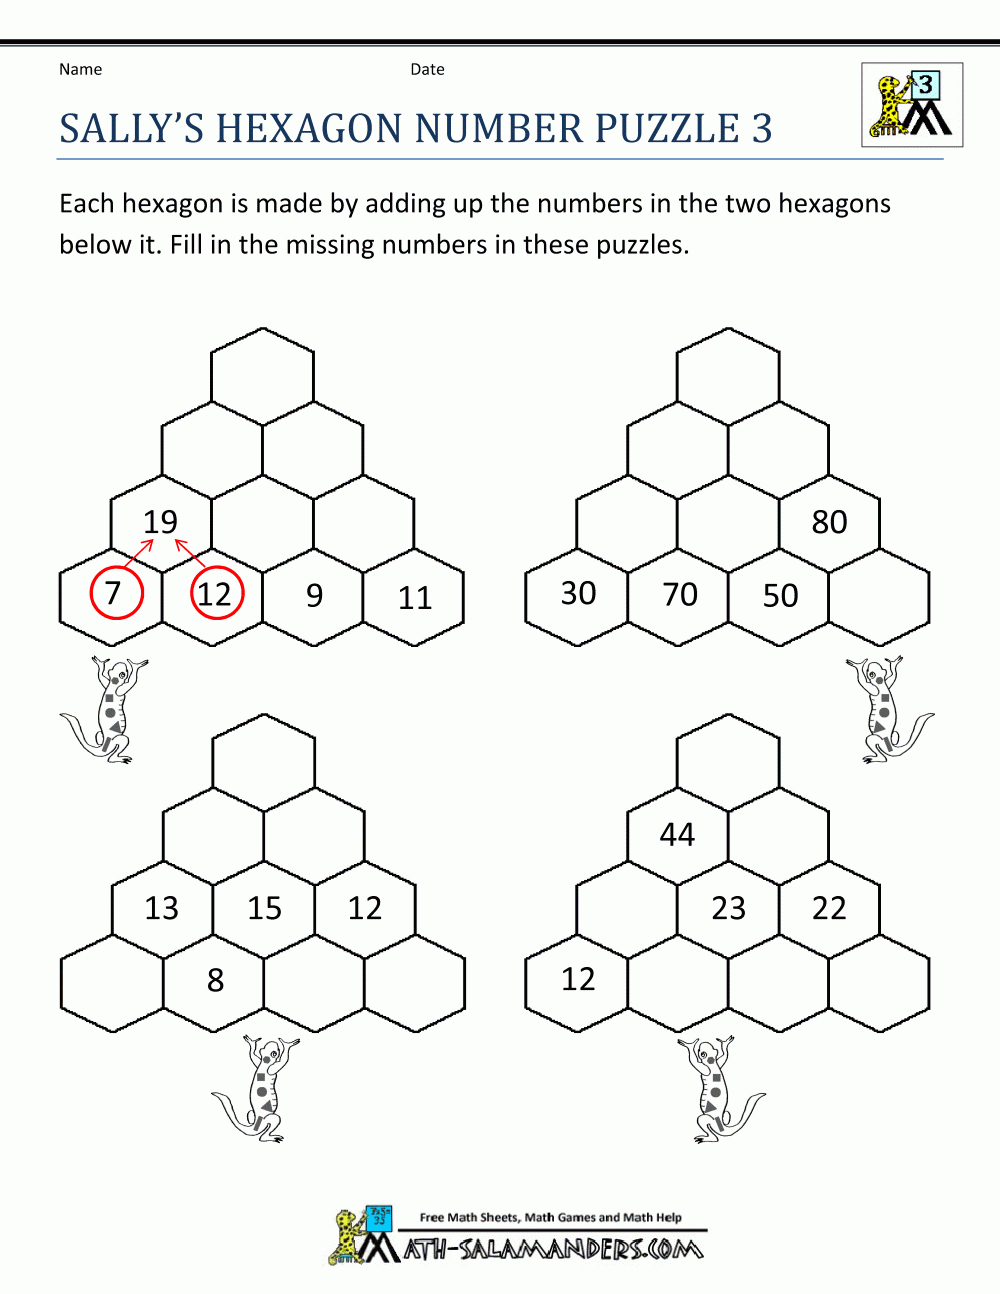 Printable-Math-Puzzles-Sallys-Hexagon-Number-Puzzle-3.gif